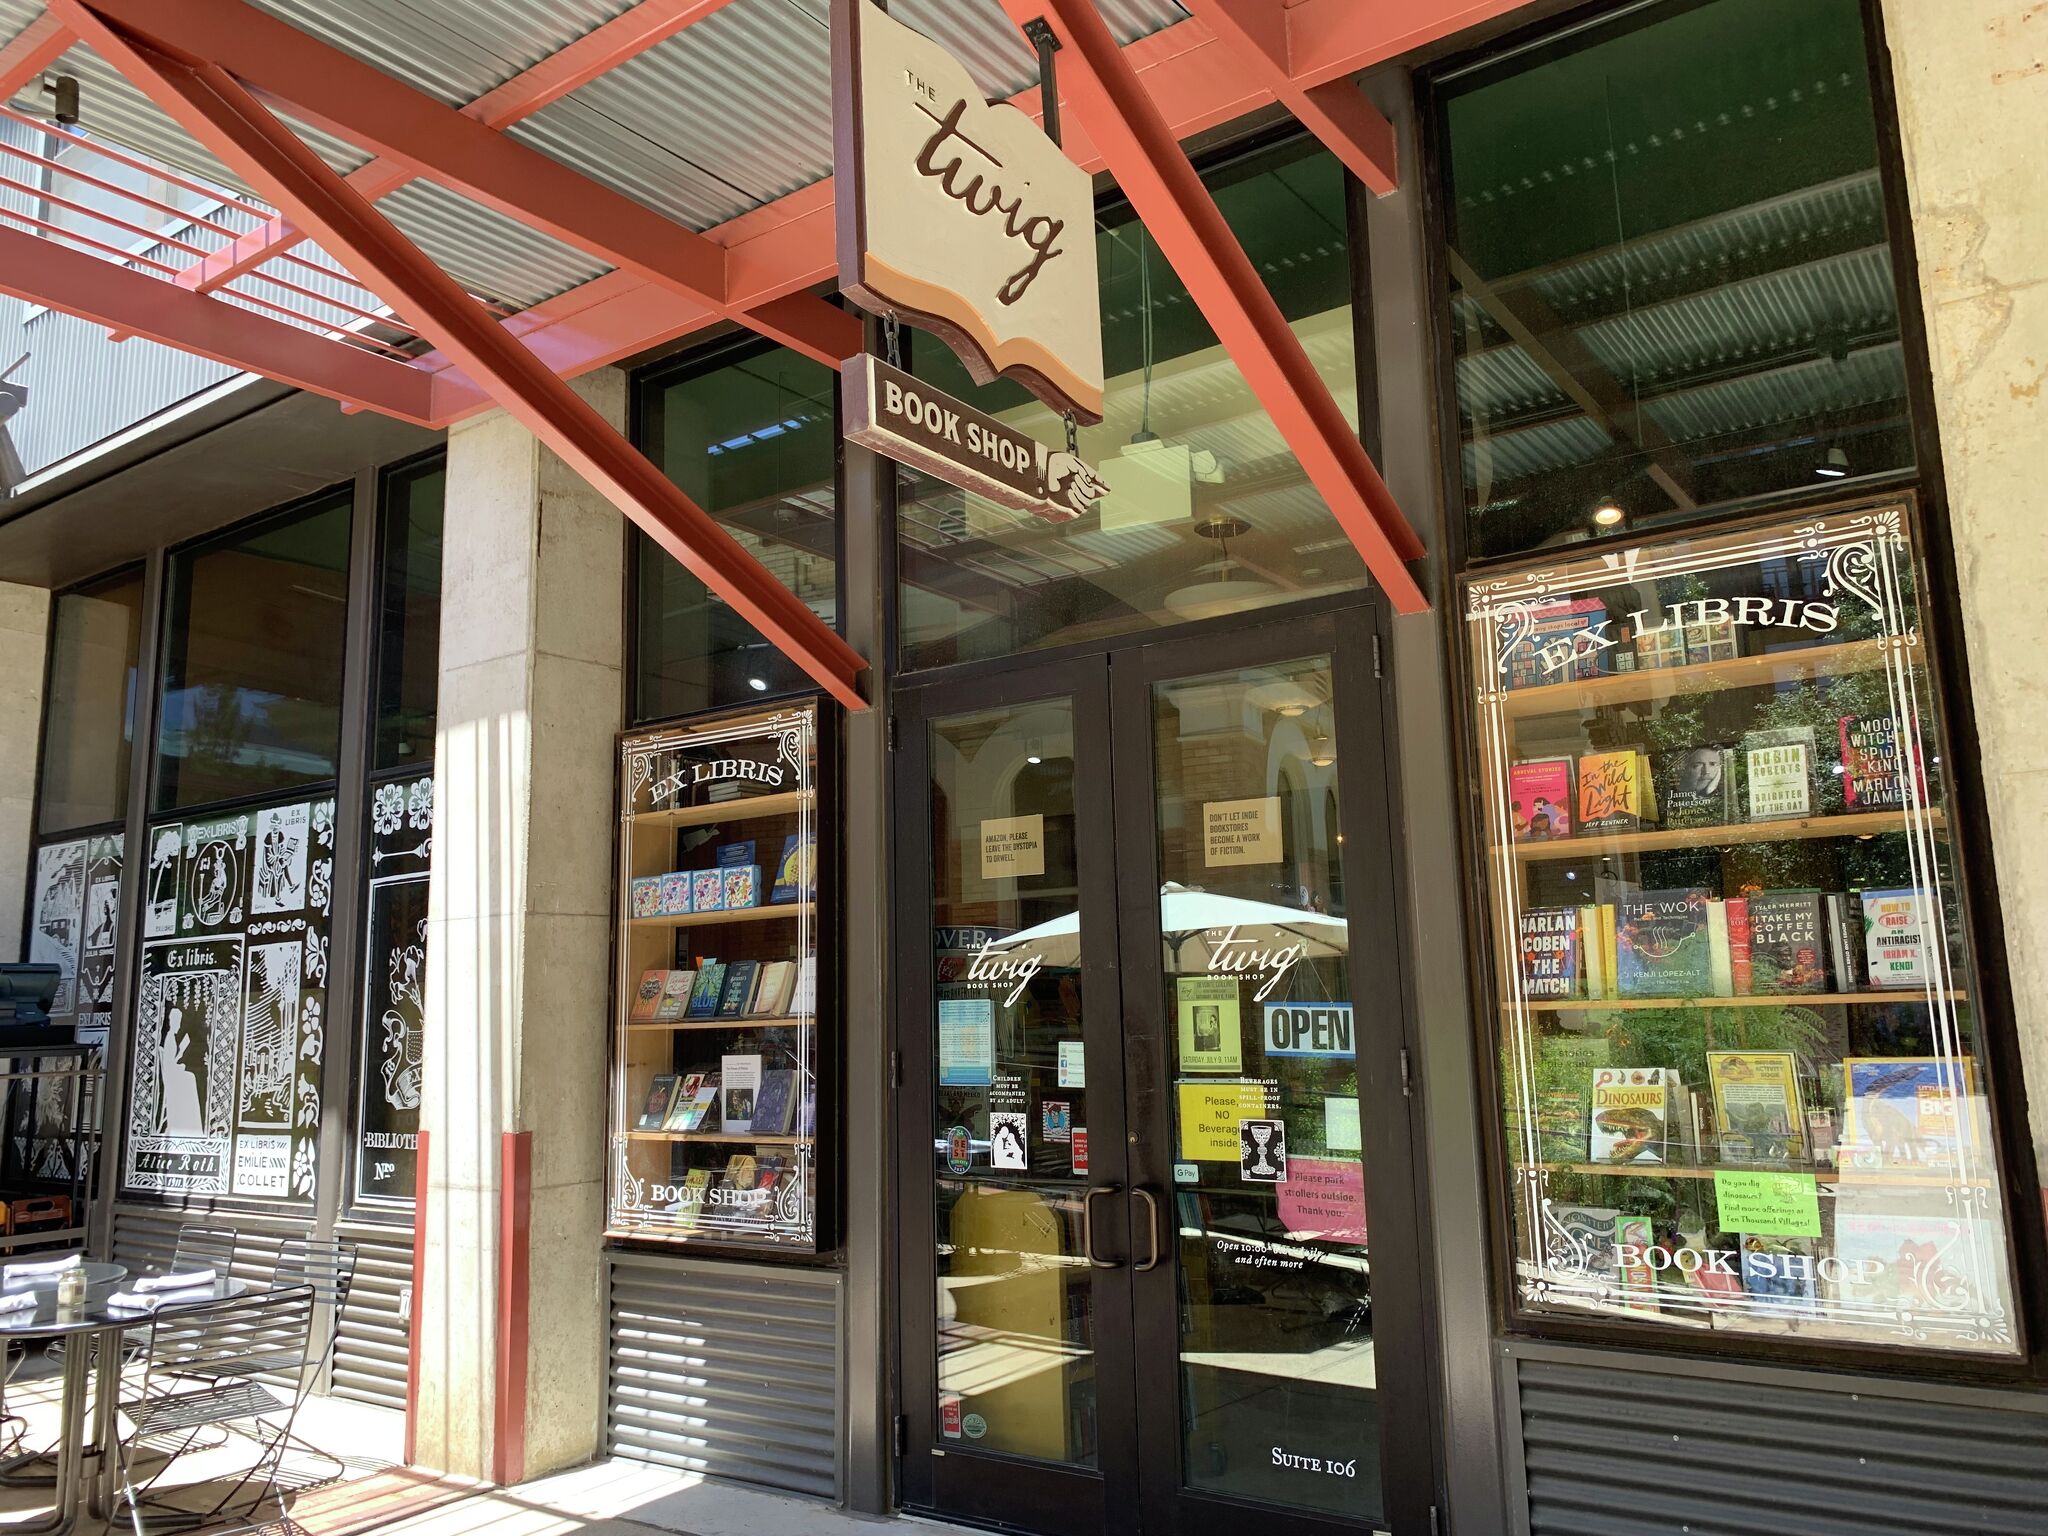 The Twig reflects on San Antonio's oldest bookstore